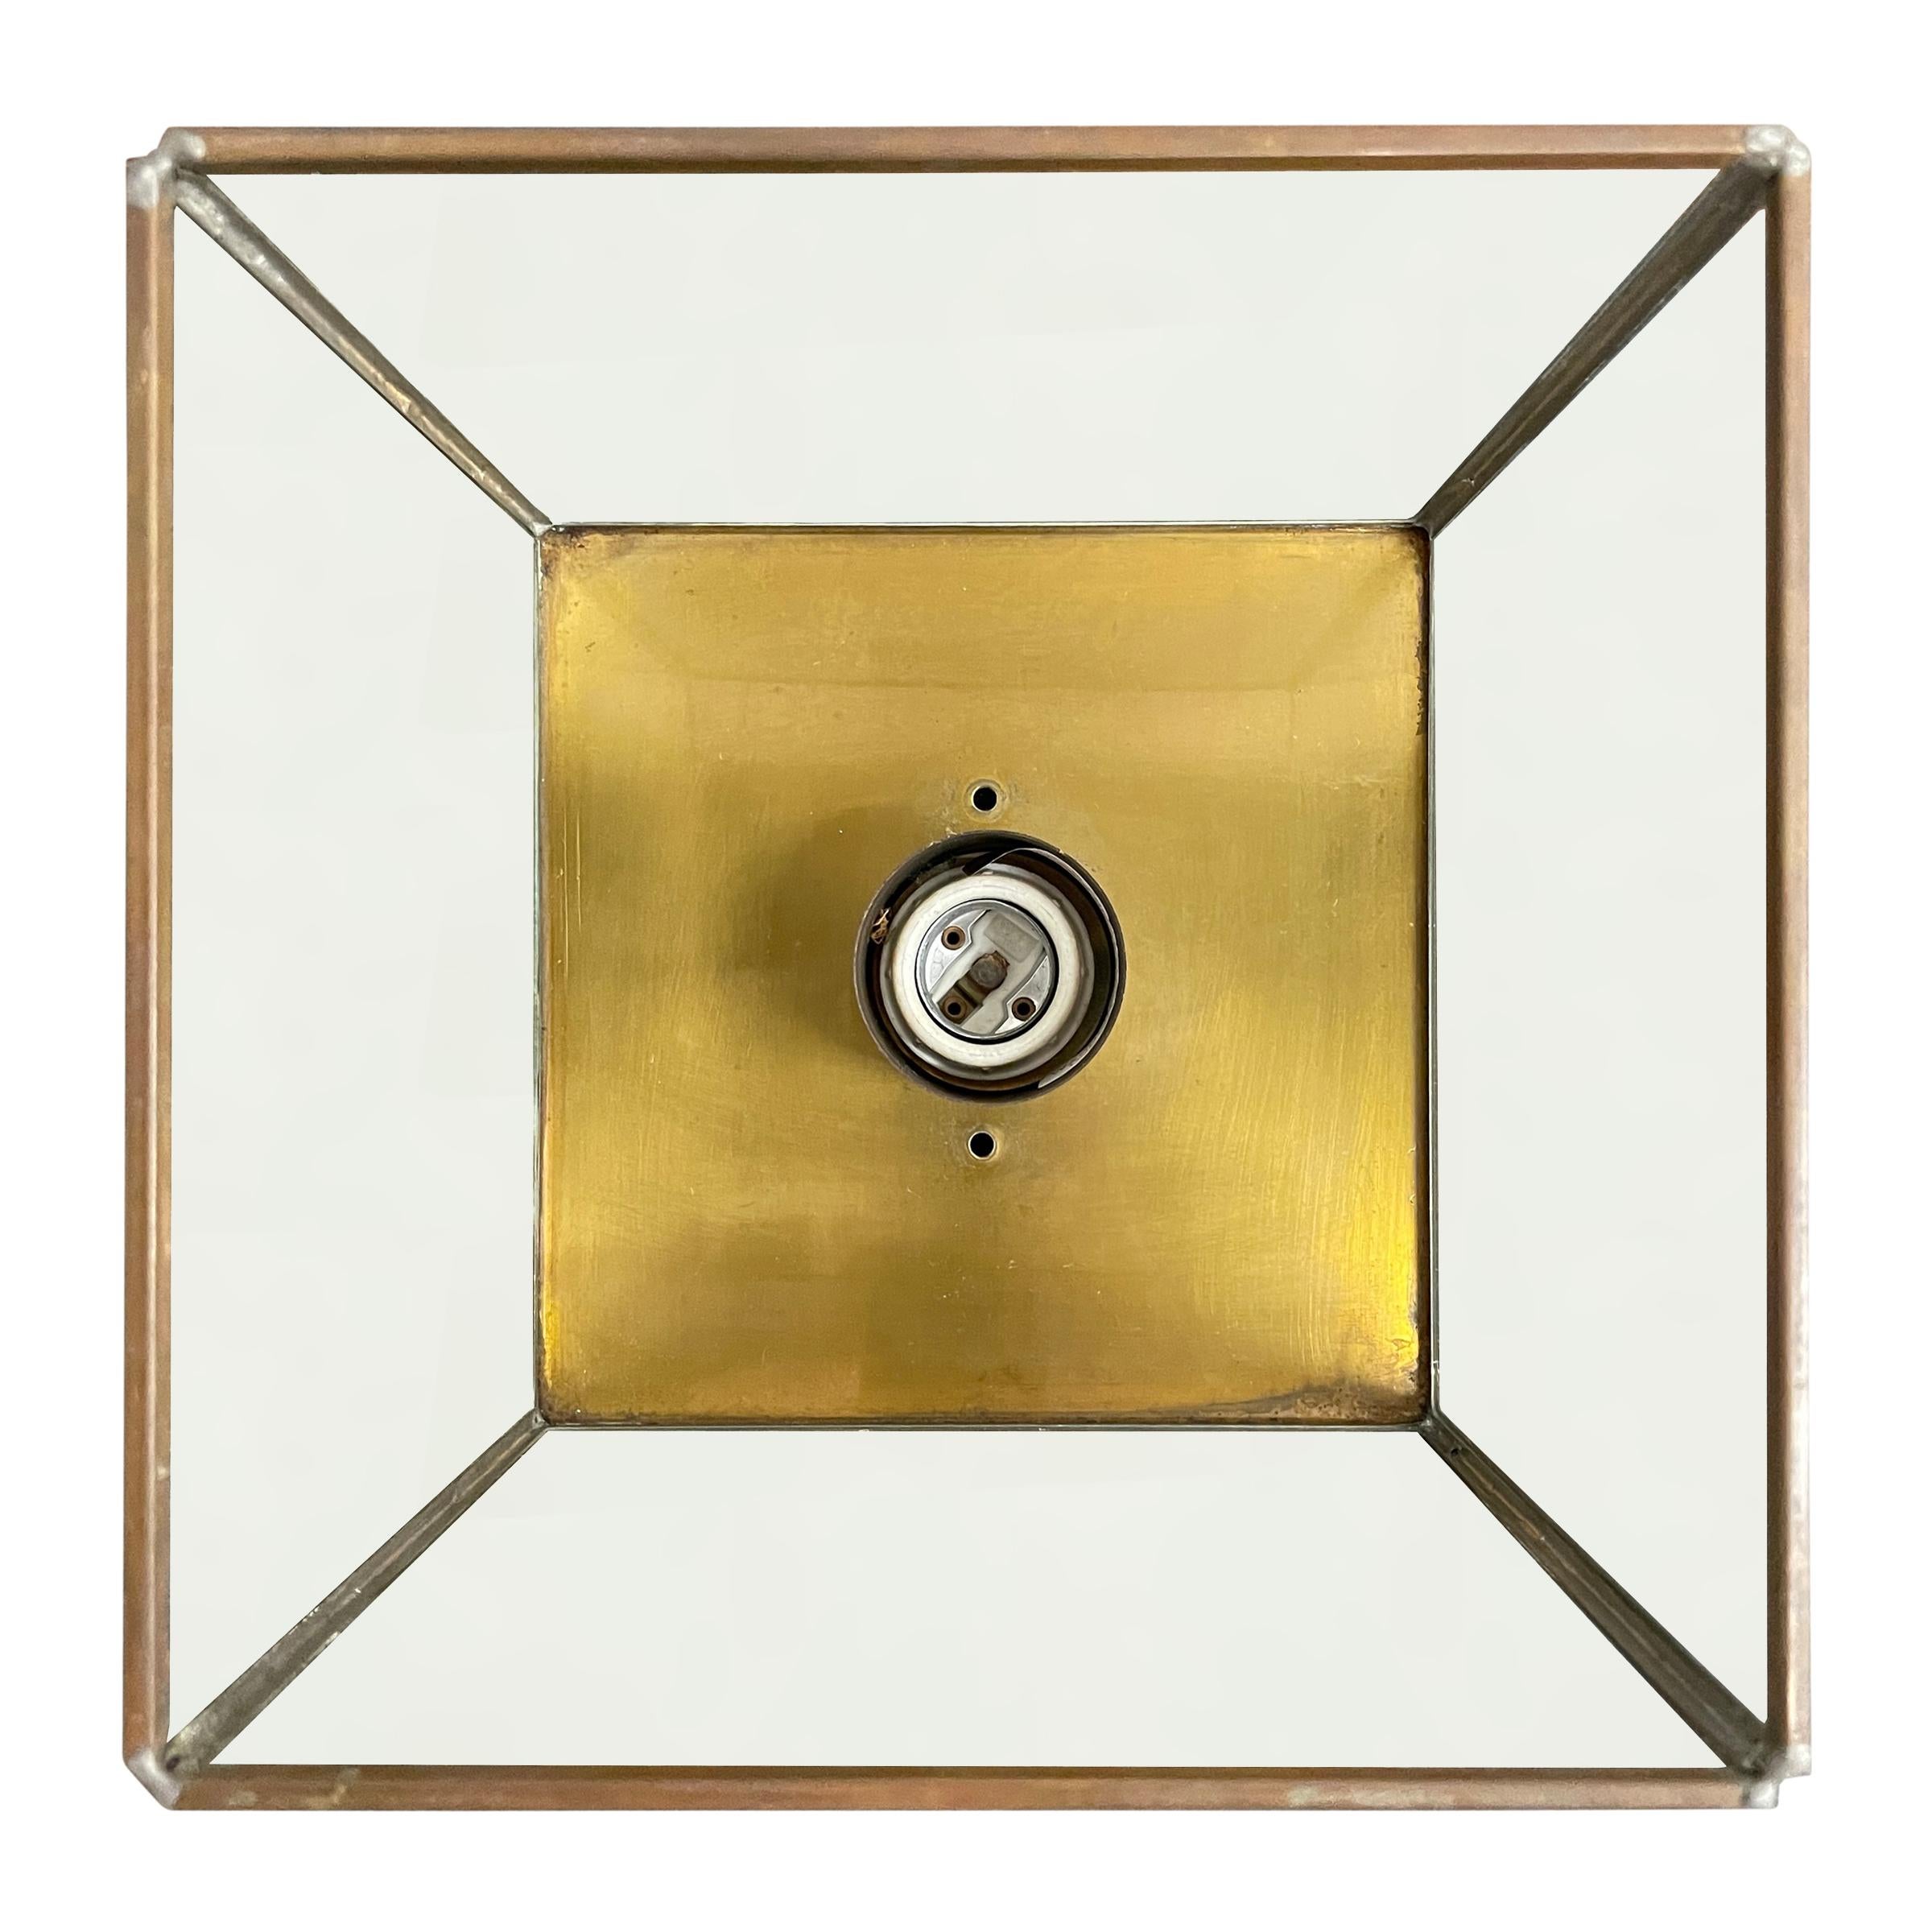 Late 20th Century Vintage Brass and Glass Cube Flushmount Light Fixture